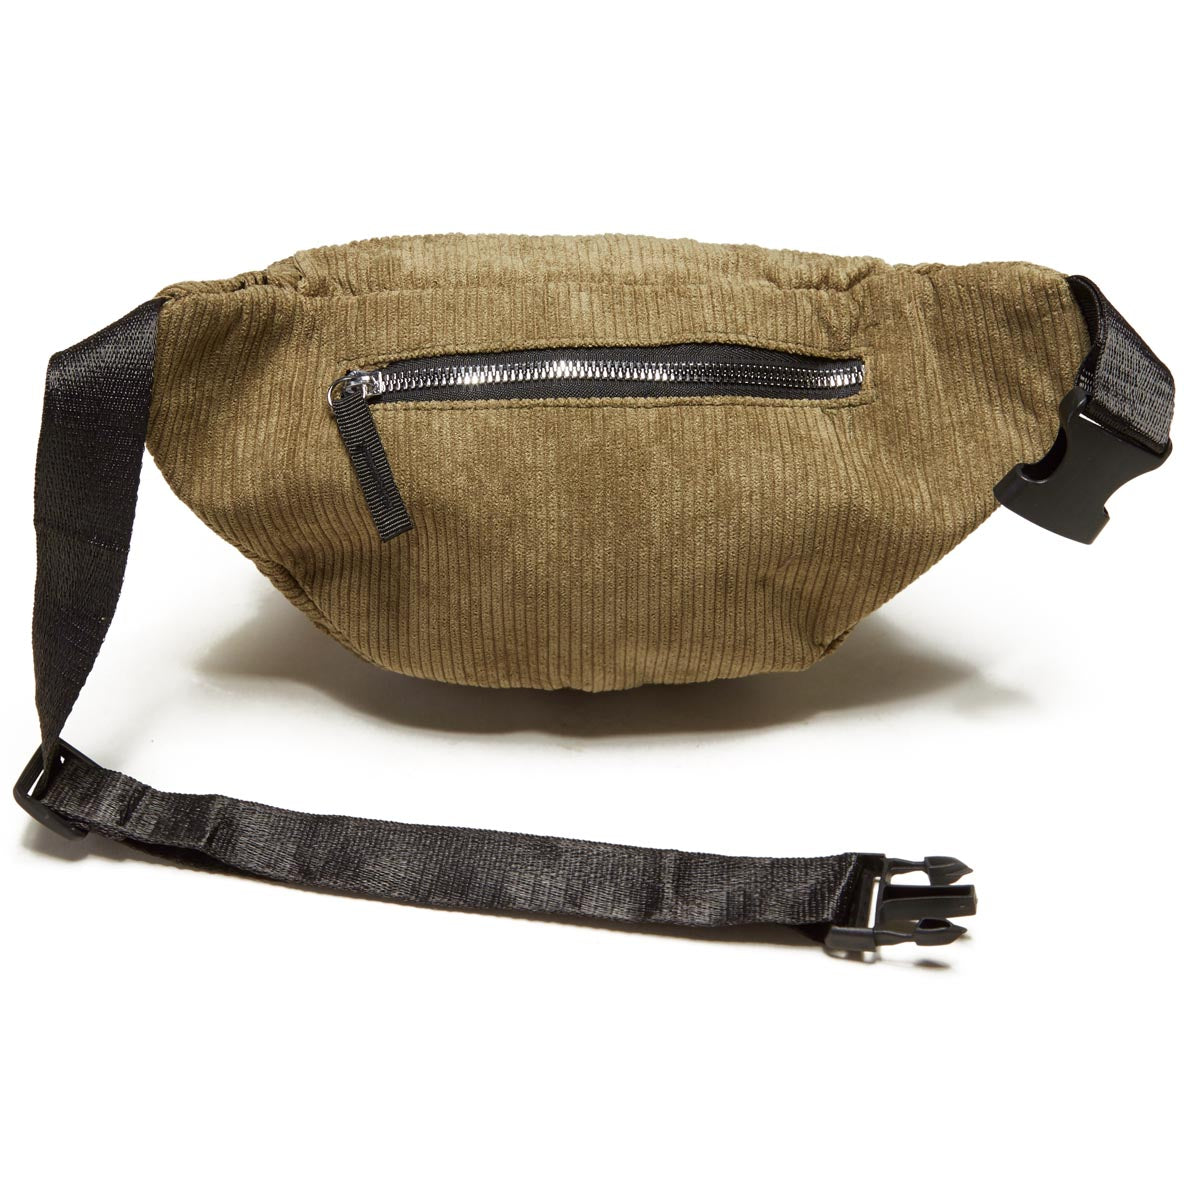 Less Than Local Bindle Bag - Olive image 2